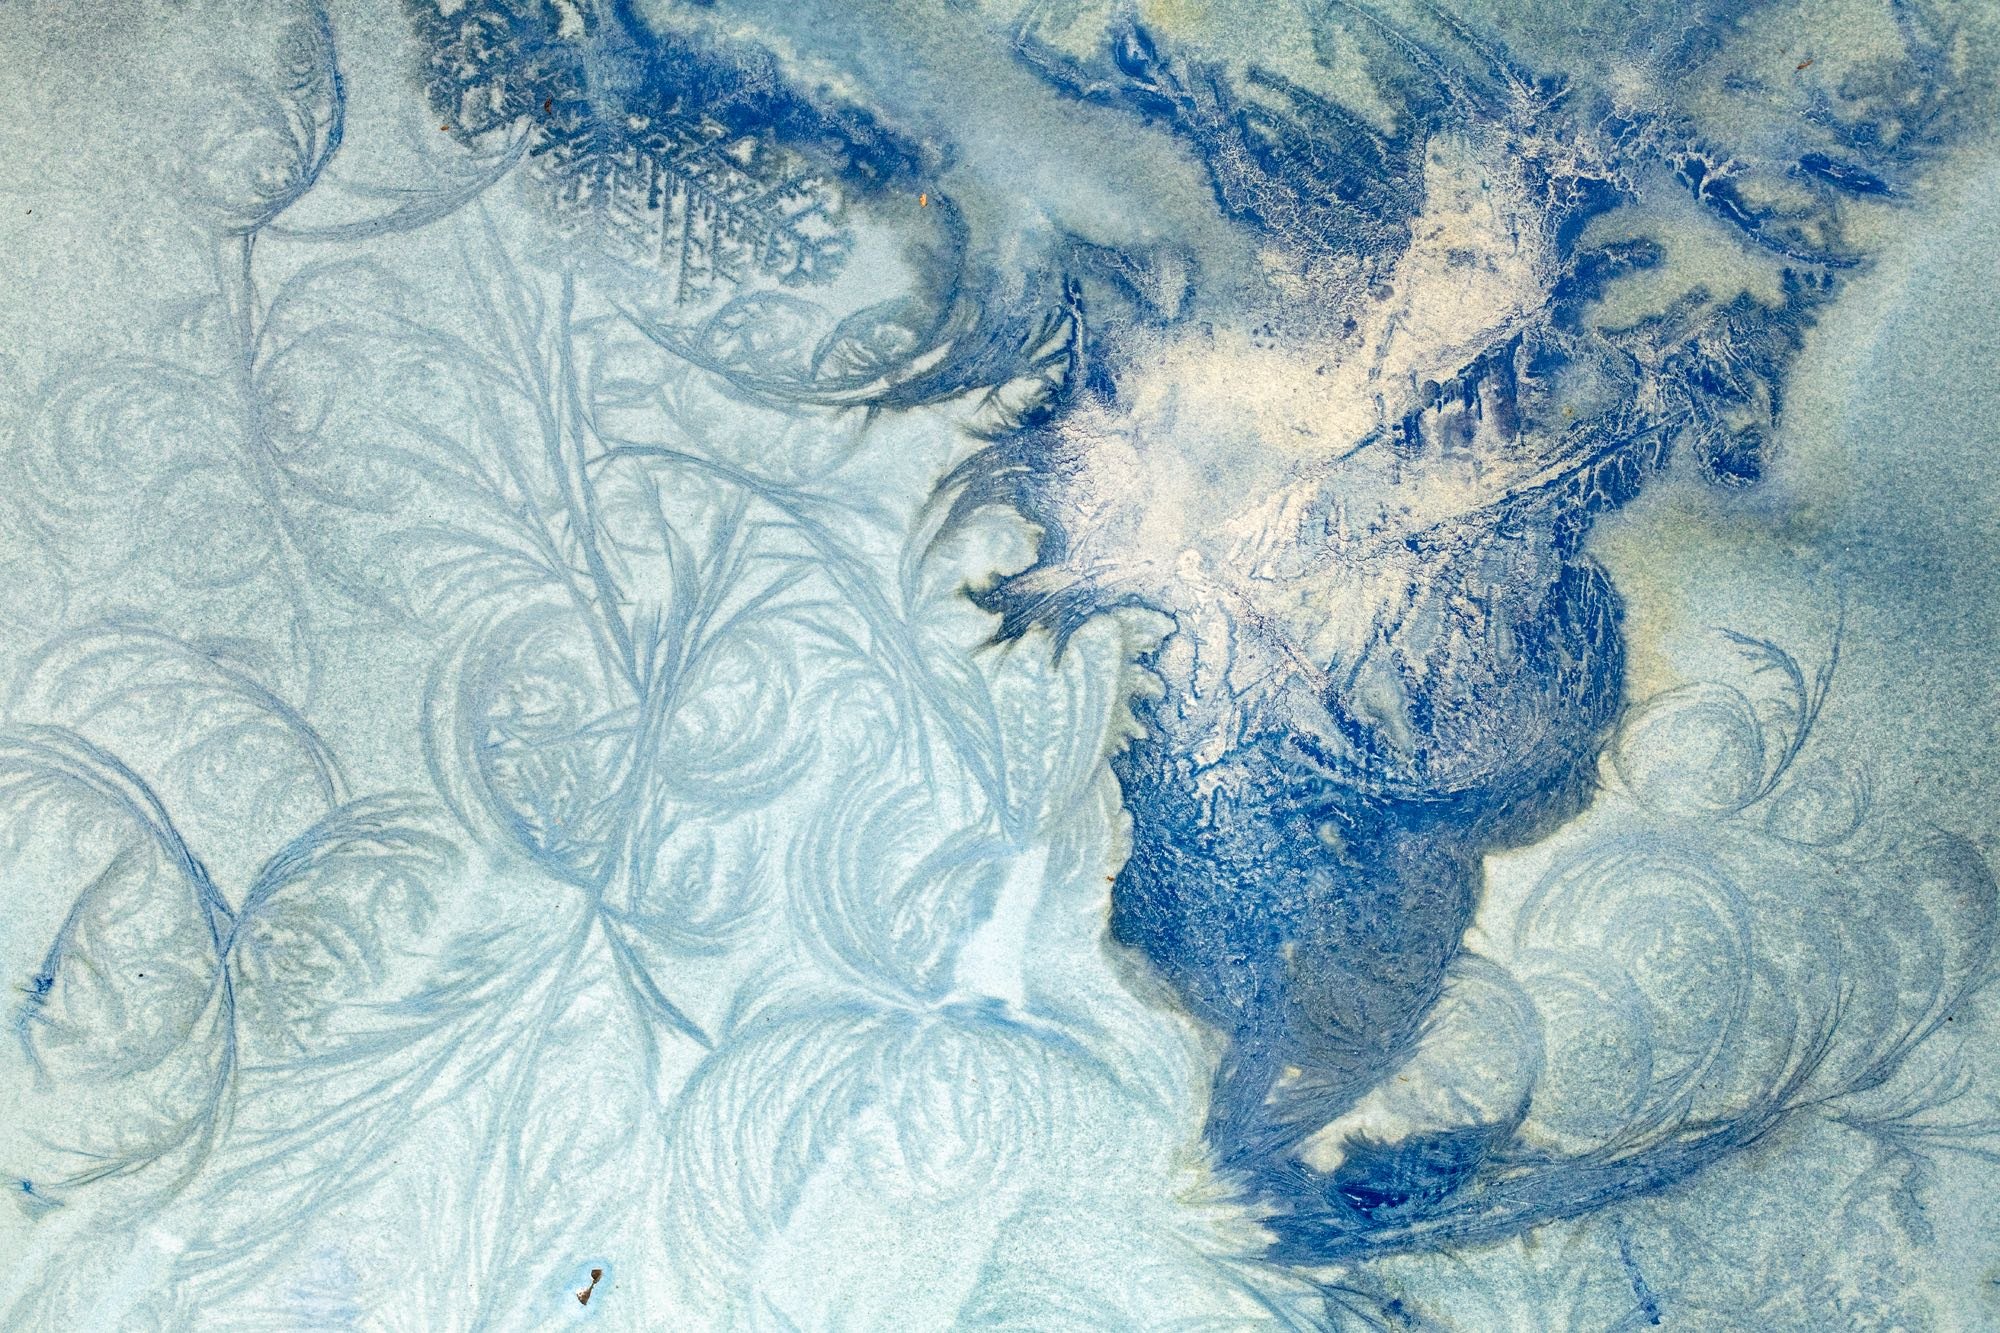 Detail of ICE.